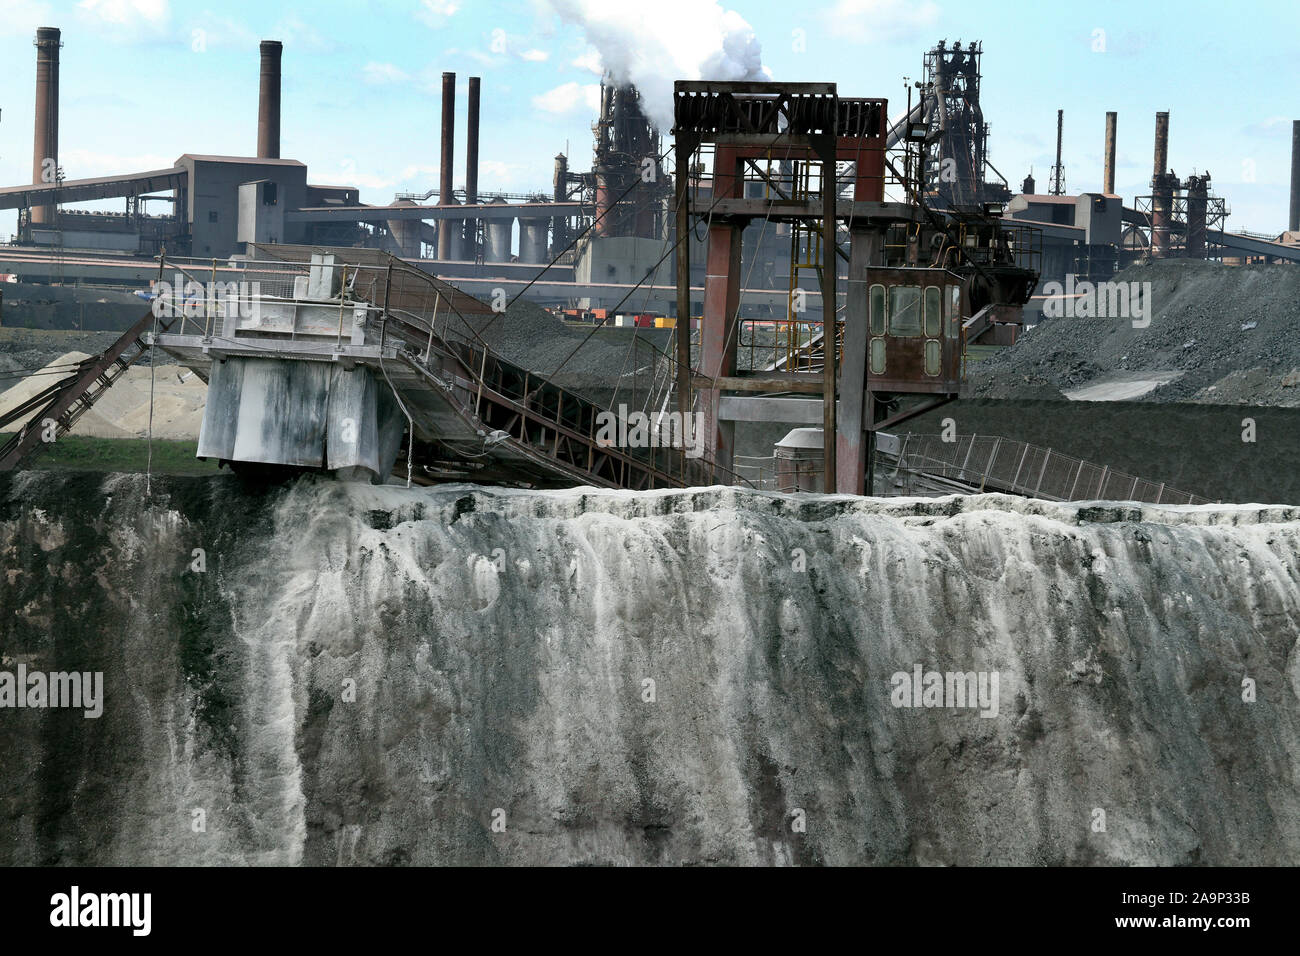 Ore blending and blast furnaces on large integrated steelworks. Stock Photo